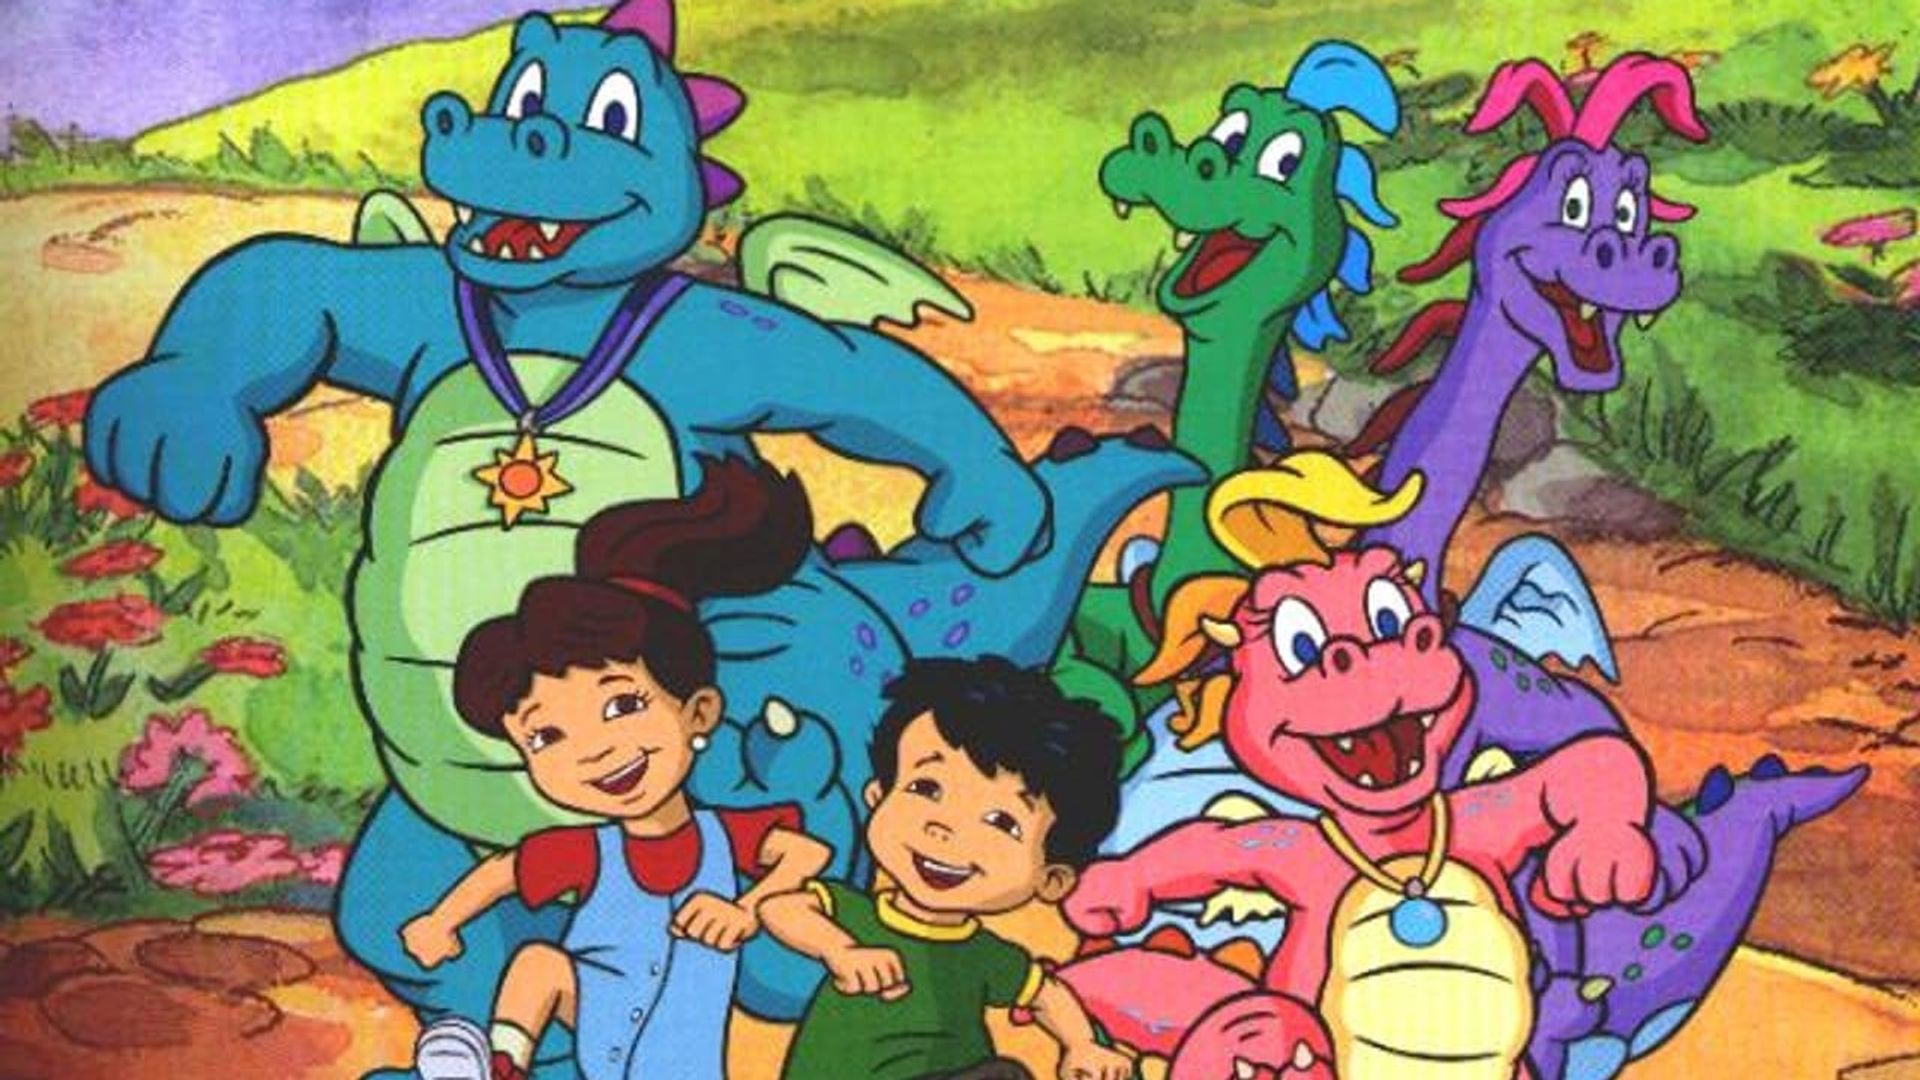 Dragon Tales - Watch Episodes on Prime Video or Streaming Online | Reelgood